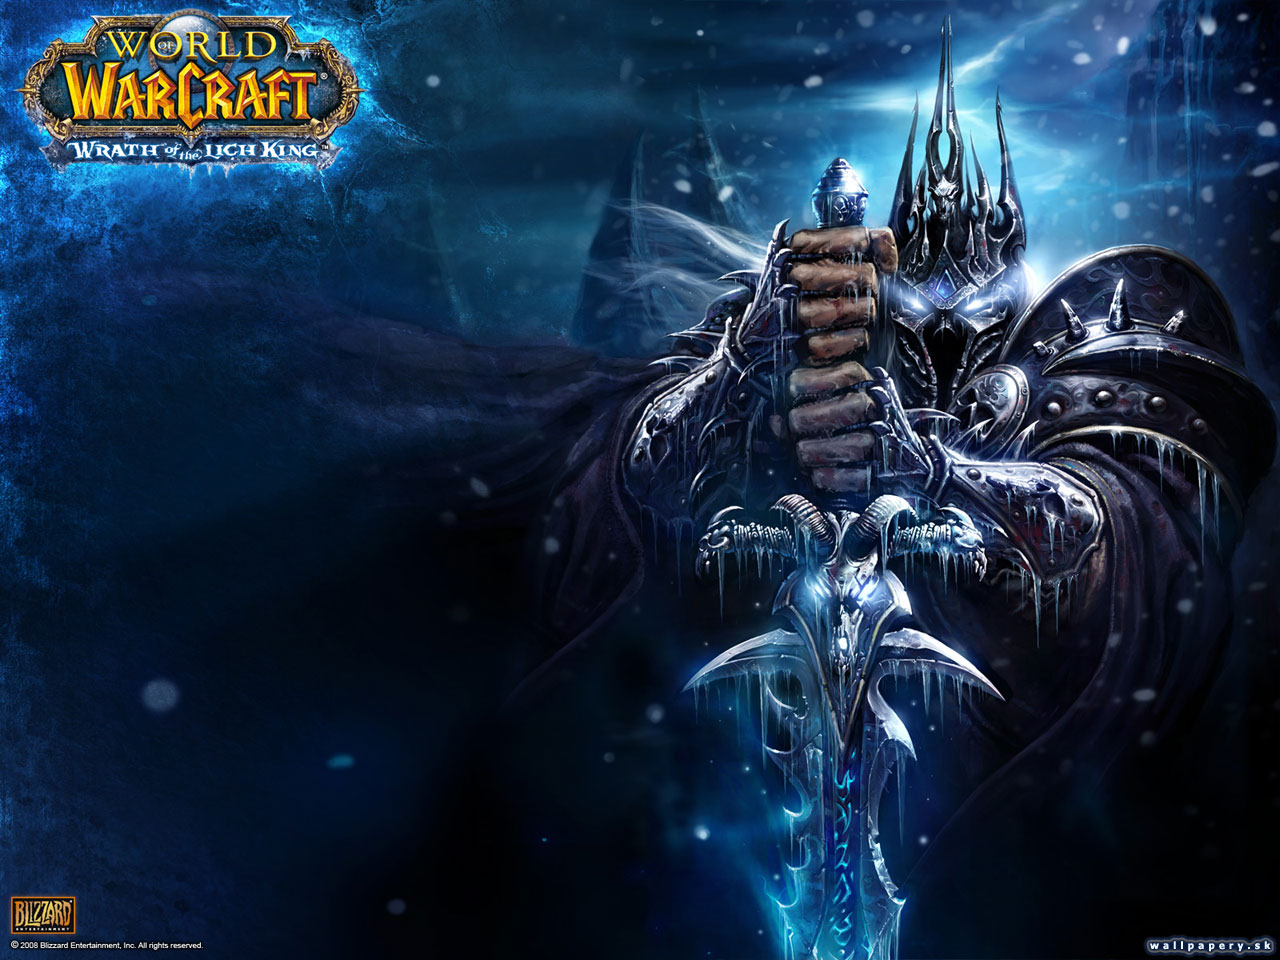 World of Warcraft: Wrath of the Lich King - wallpaper 11